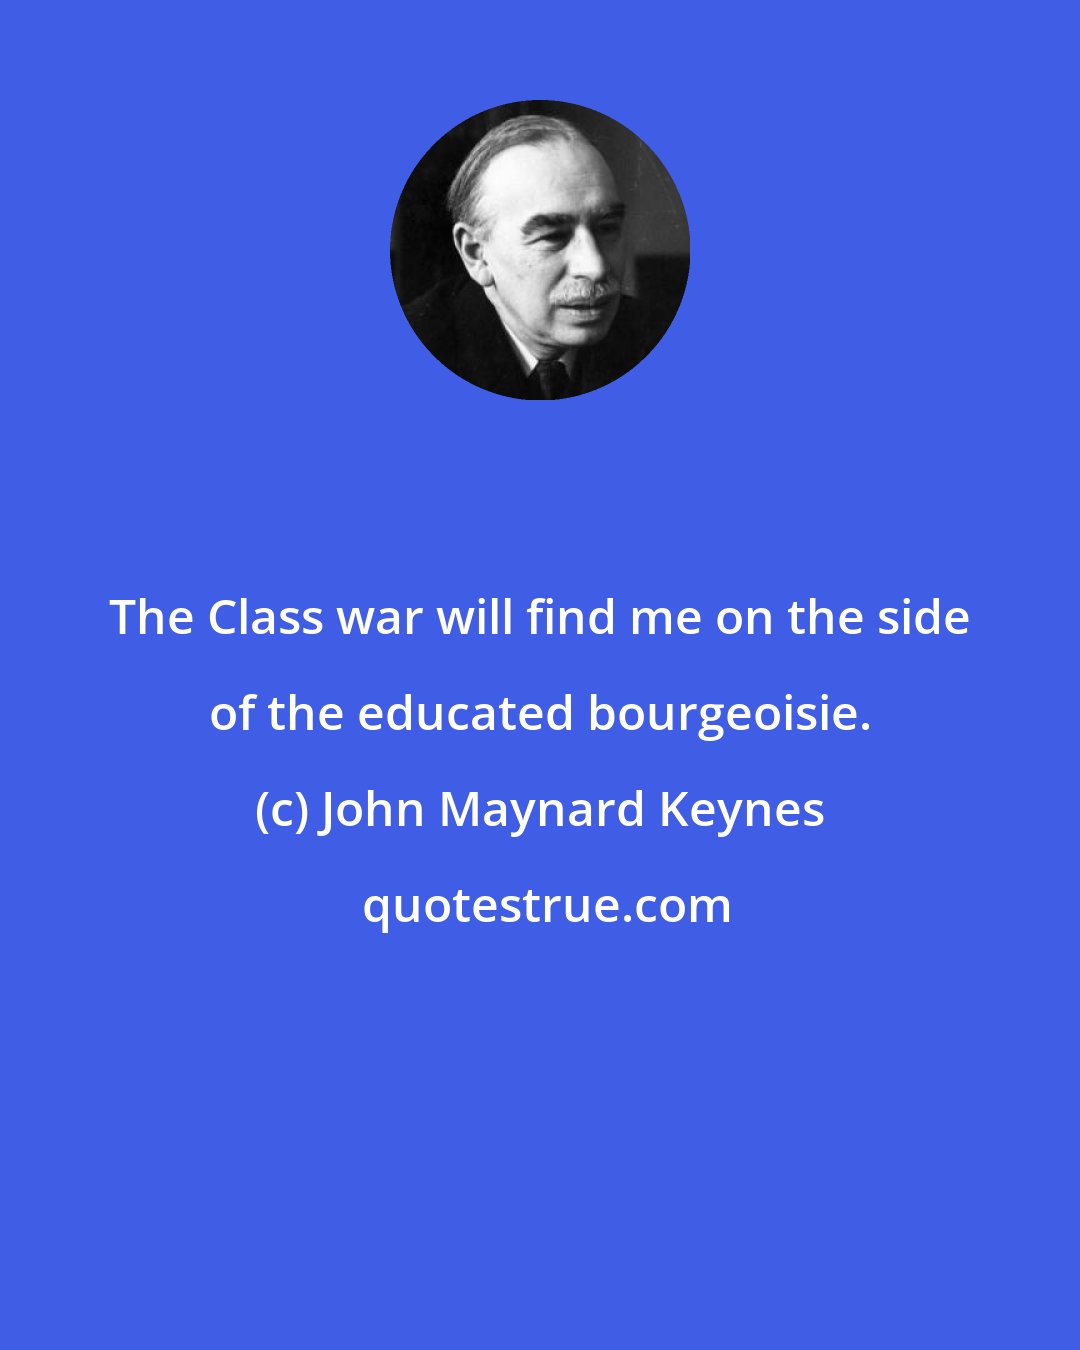 John Maynard Keynes: The Class war will find me on the side of the educated bourgeoisie.